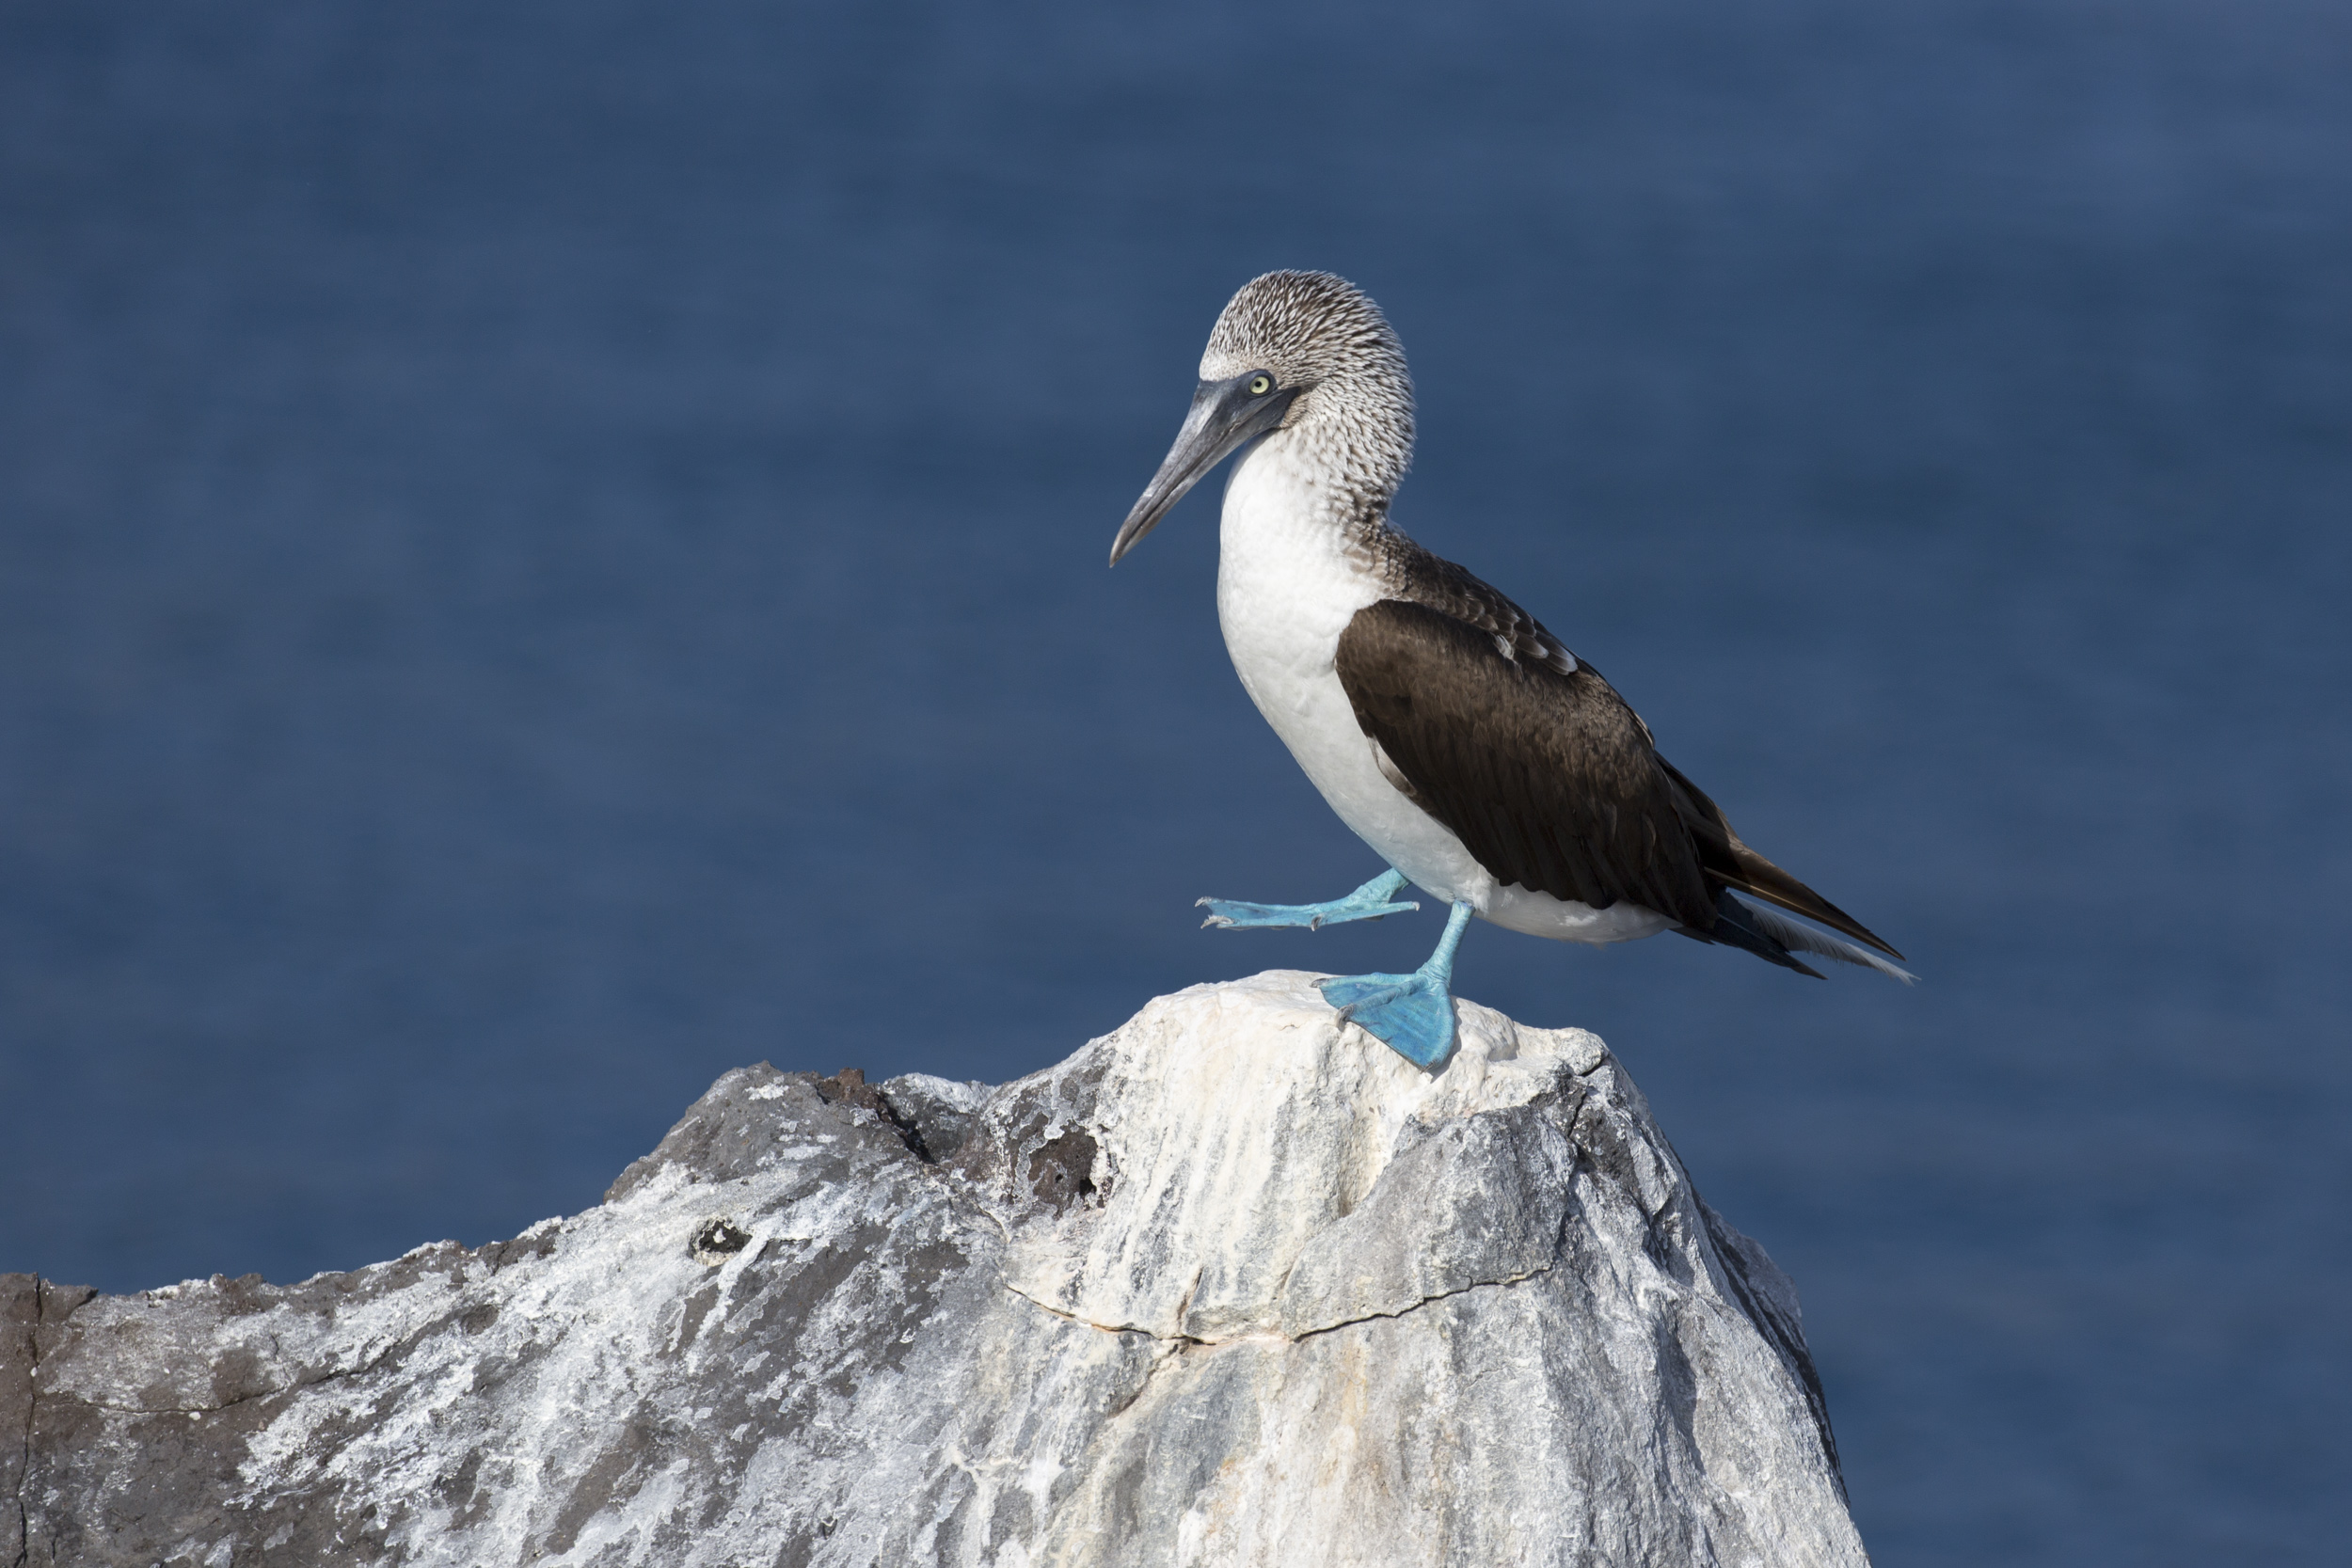 Blue-footed booby on San Cristobal Island.